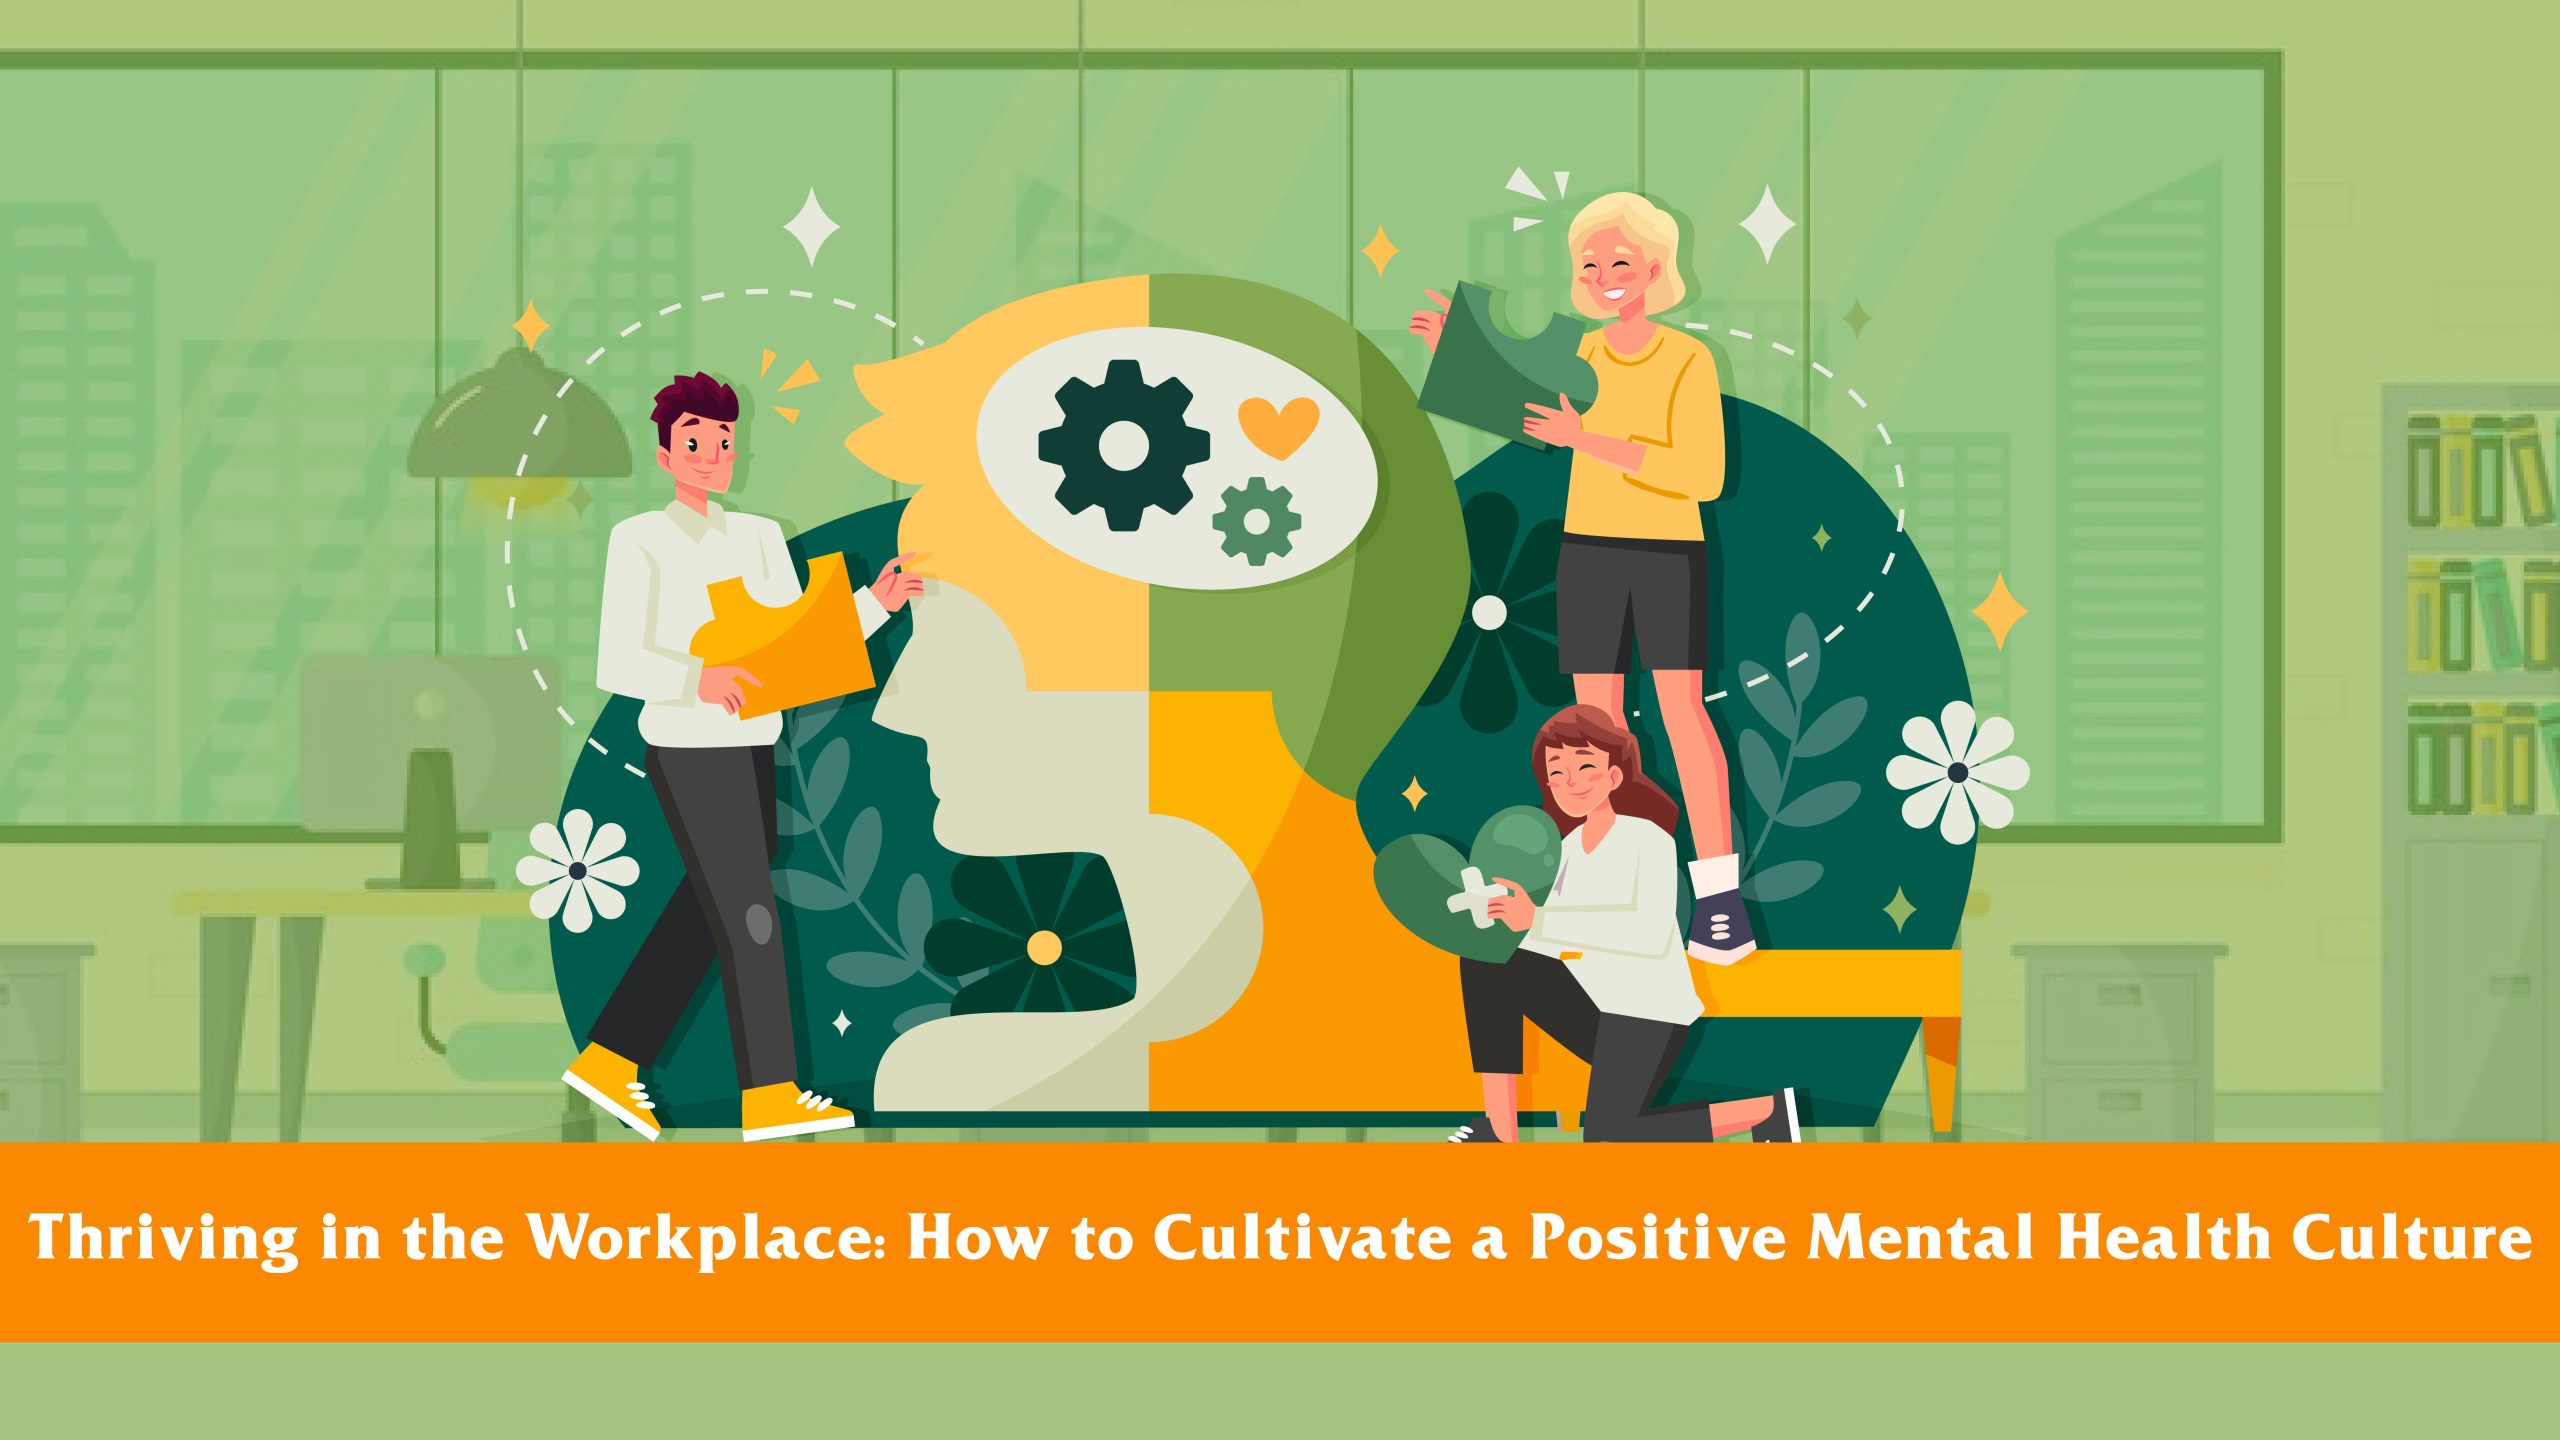 Thriving in the Workplace: How to Cultivate a Positive Mental Health Culture